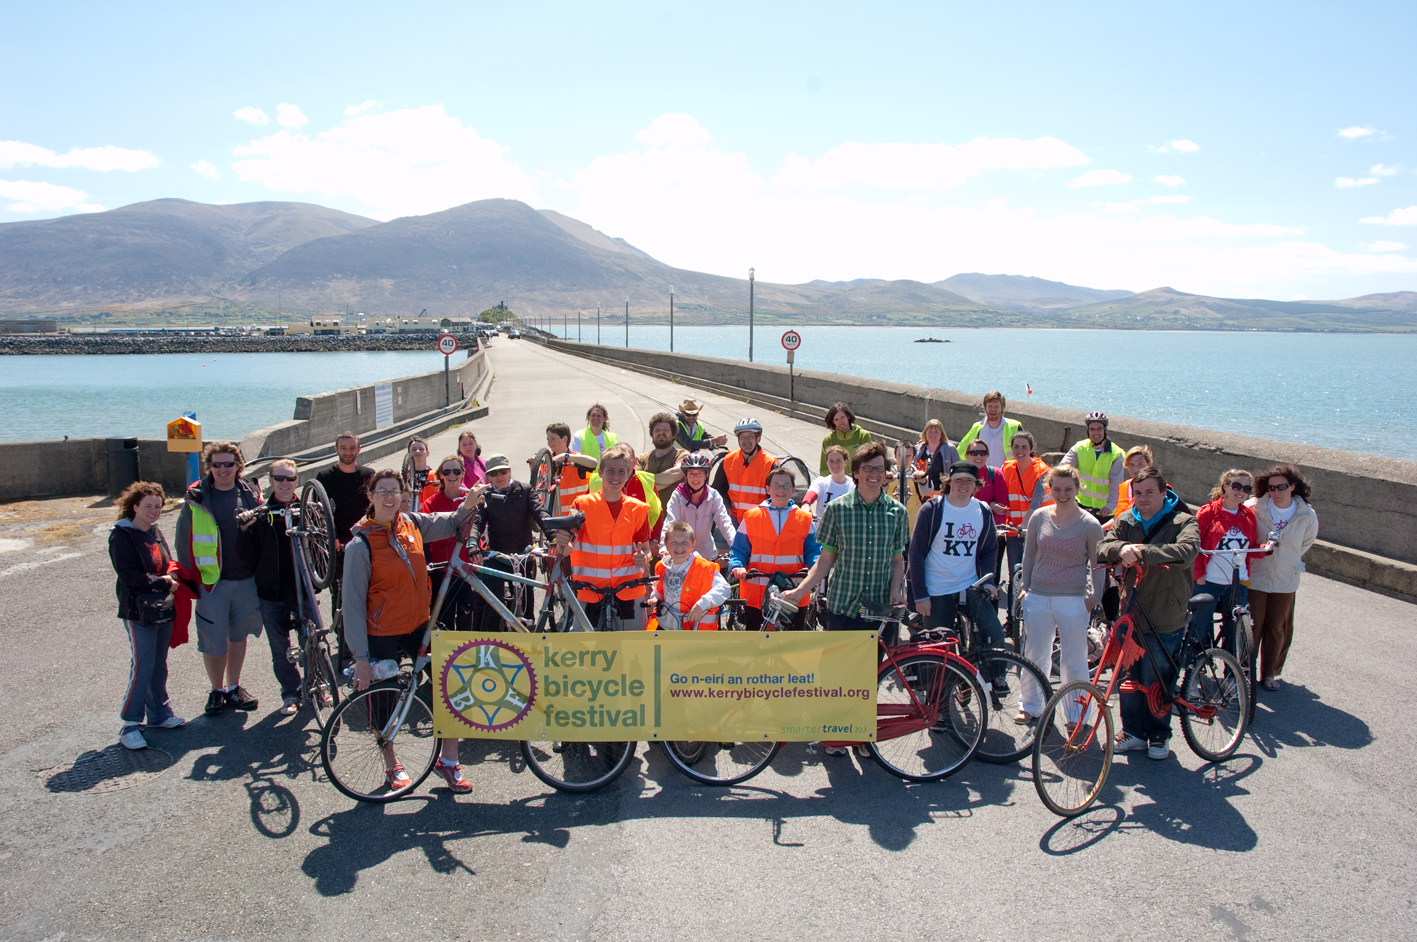 Kerry Bicycle Festival